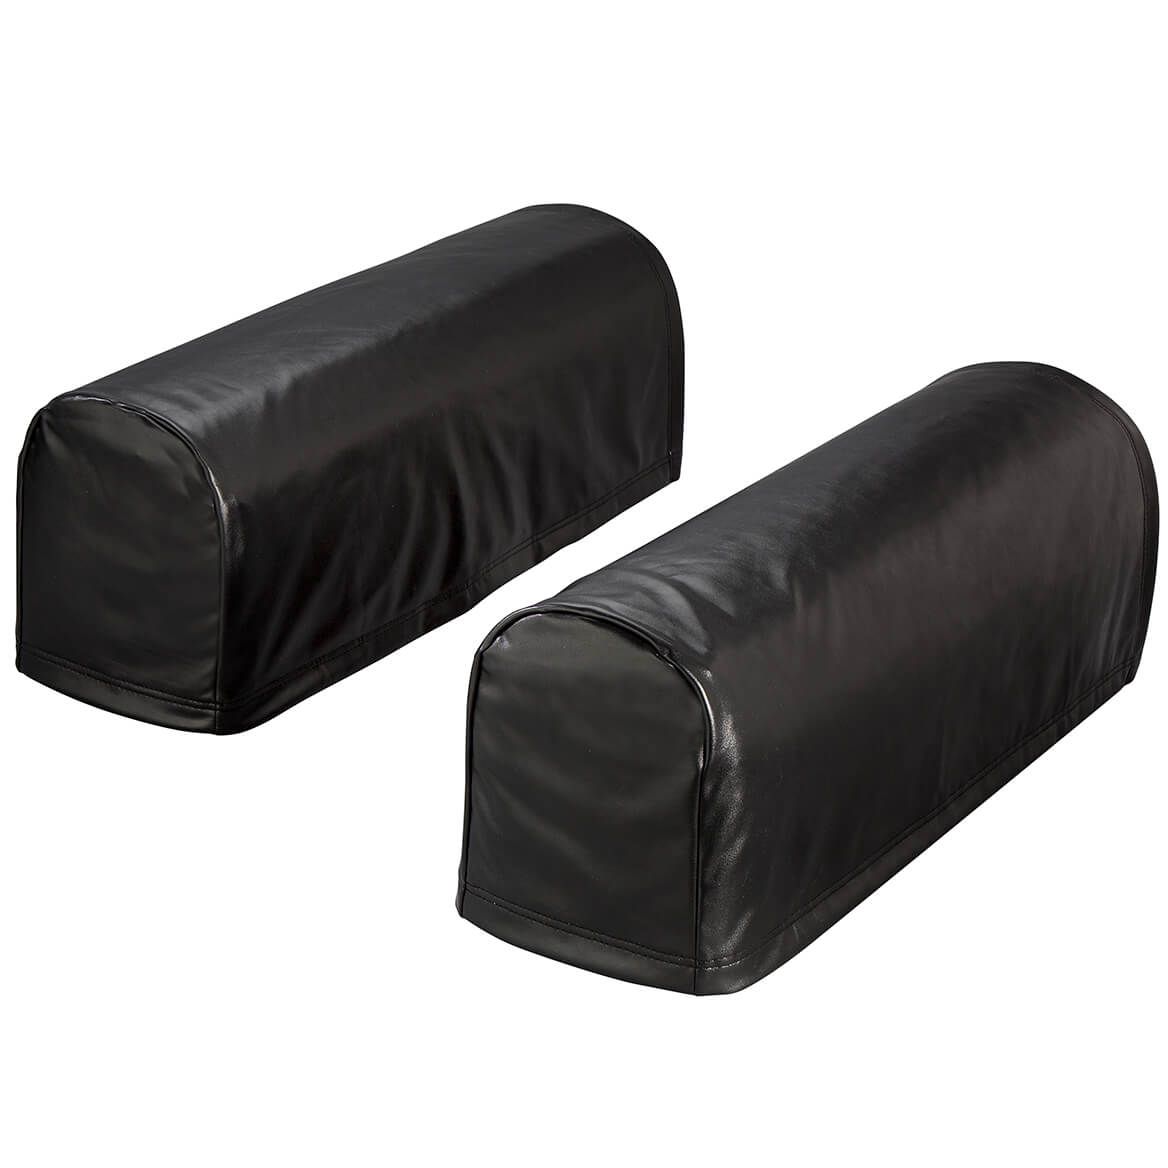 Faux Leather Arm Rest Covers, Set of 2 + '-' + 368113